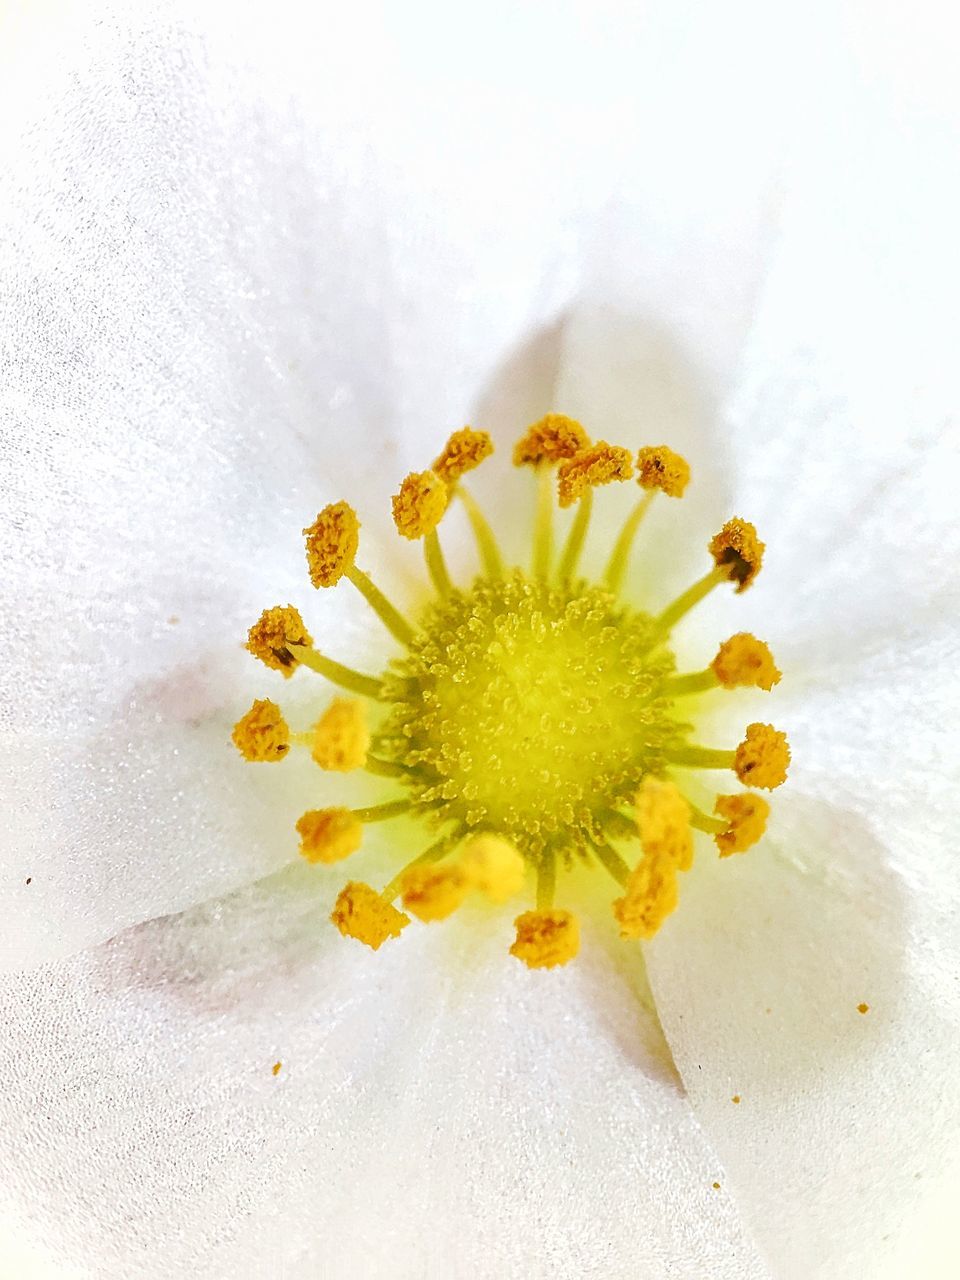 CLOSE-UP OF YELLOW FLOWER IN WHITE WALL